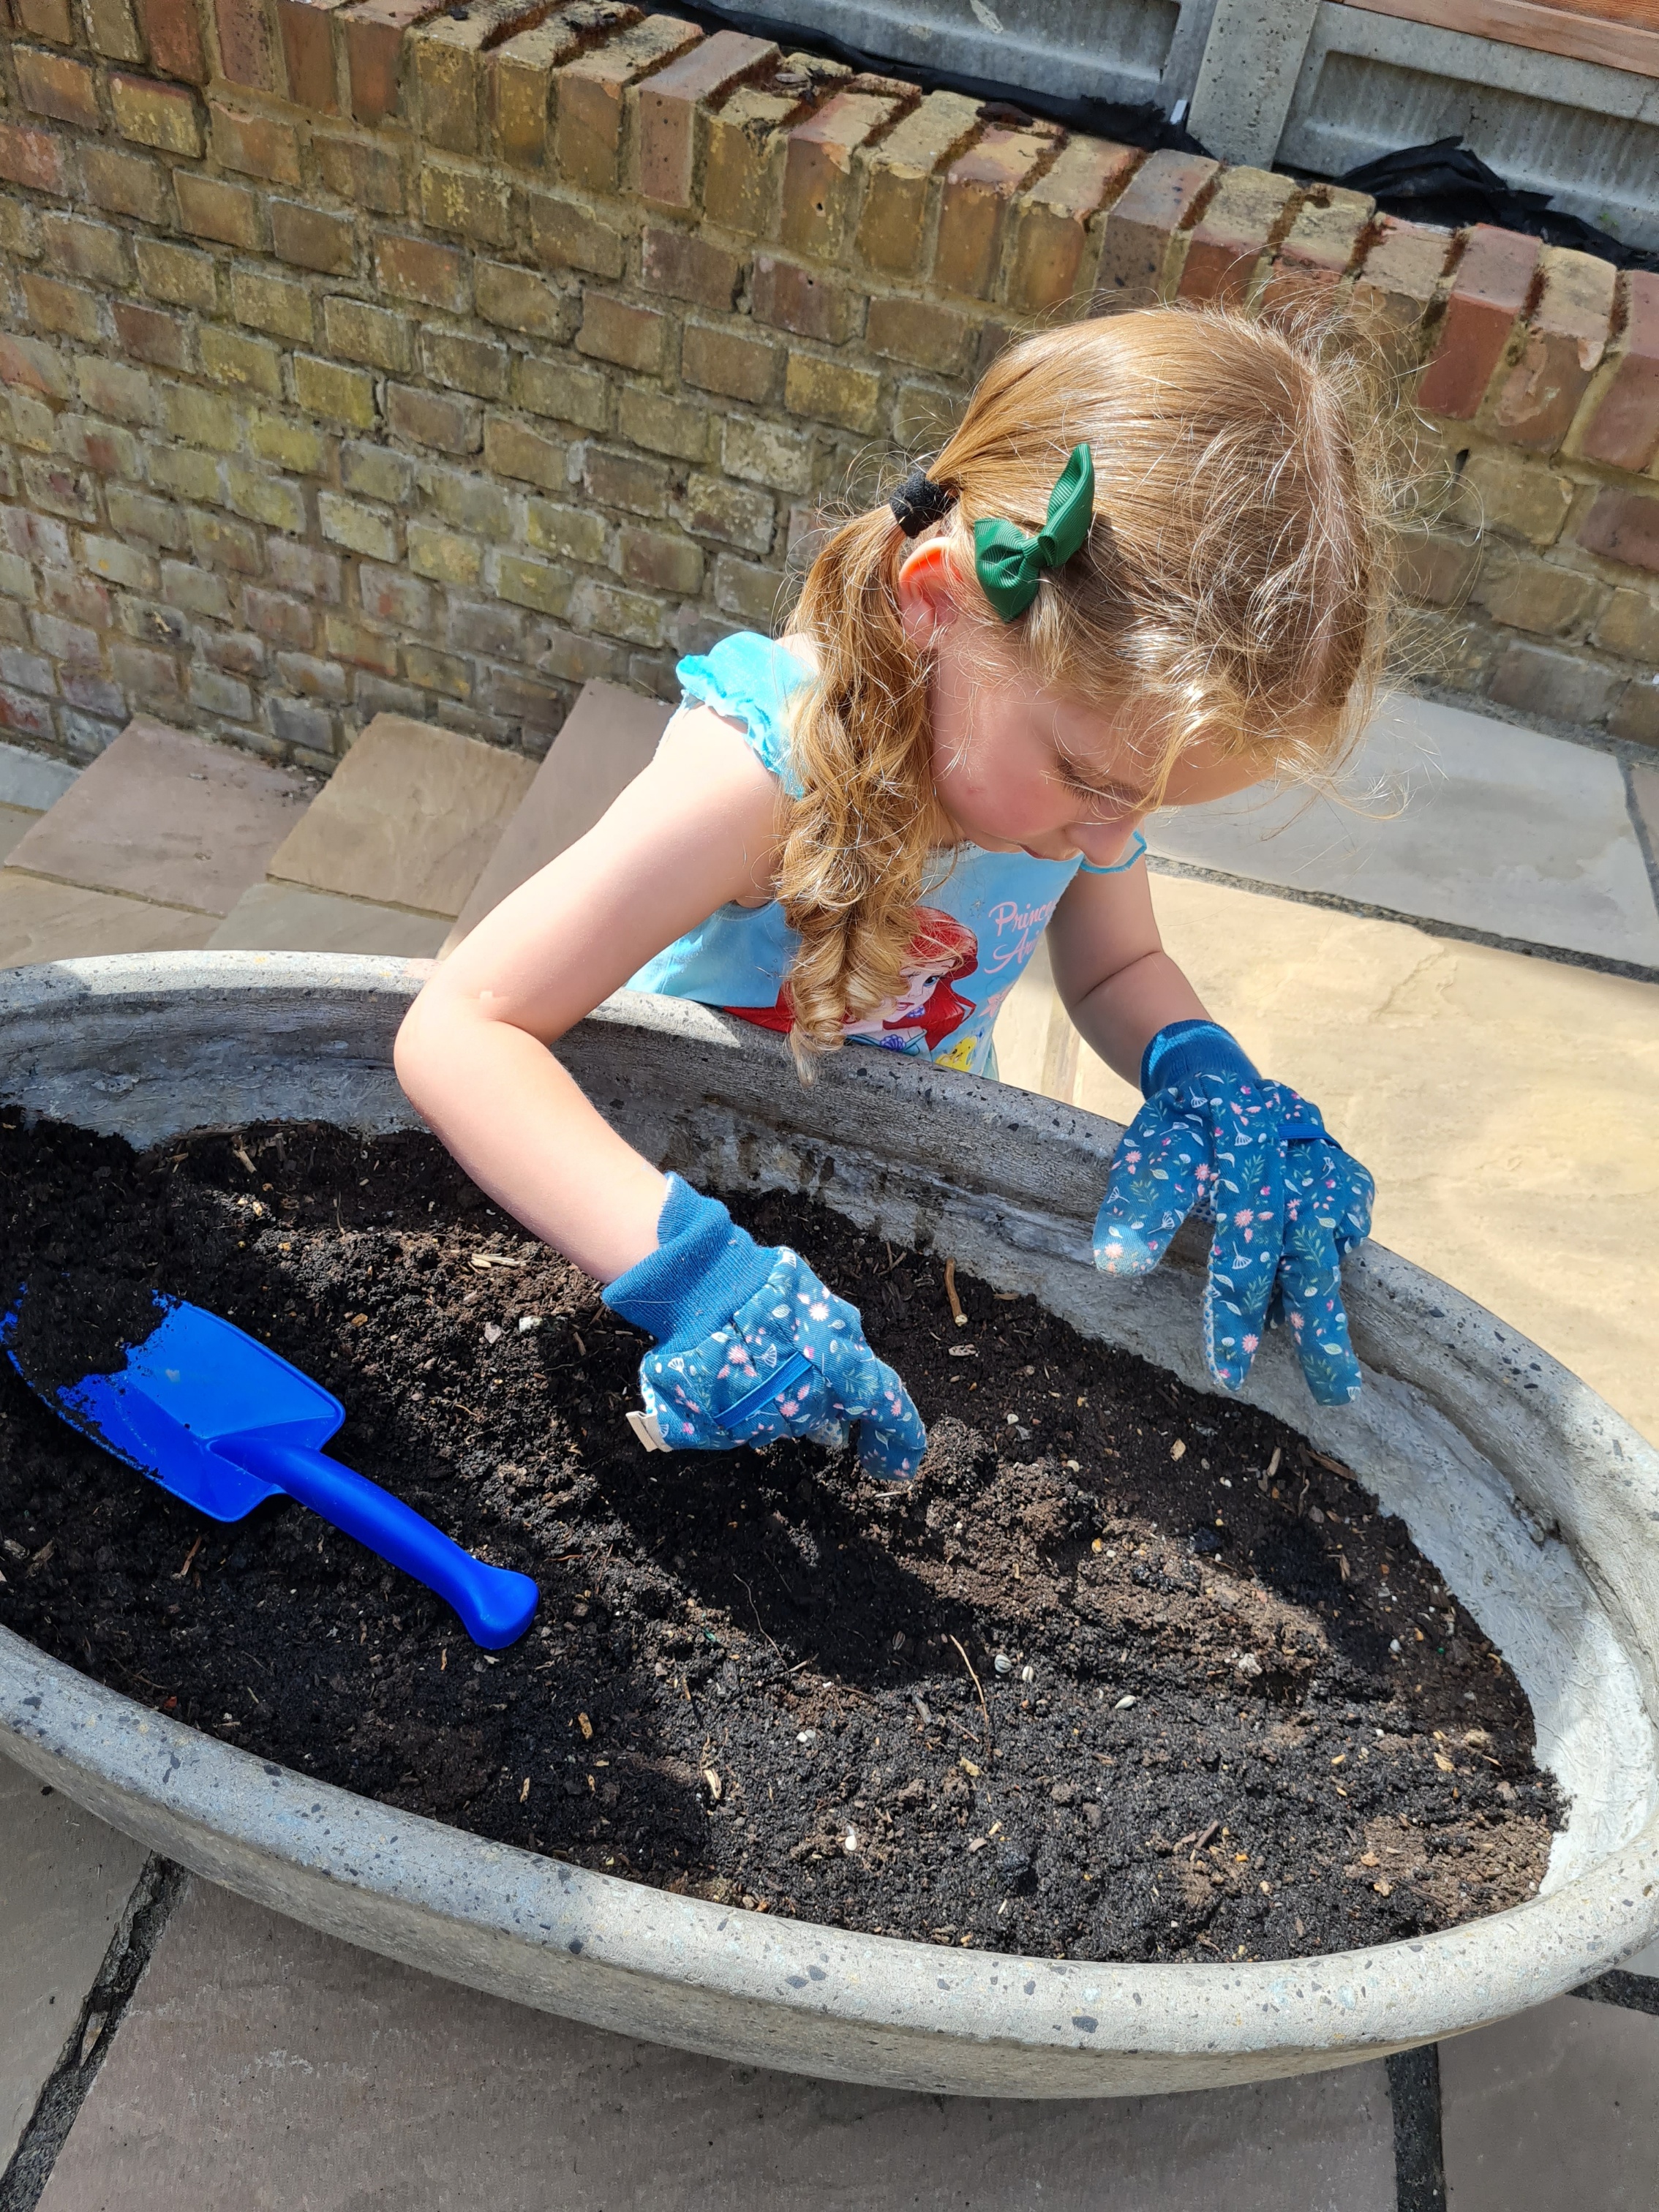 Ellena H -Mariella Rose is enjoying looking after her sunflowers! Photos of our journey enclosed